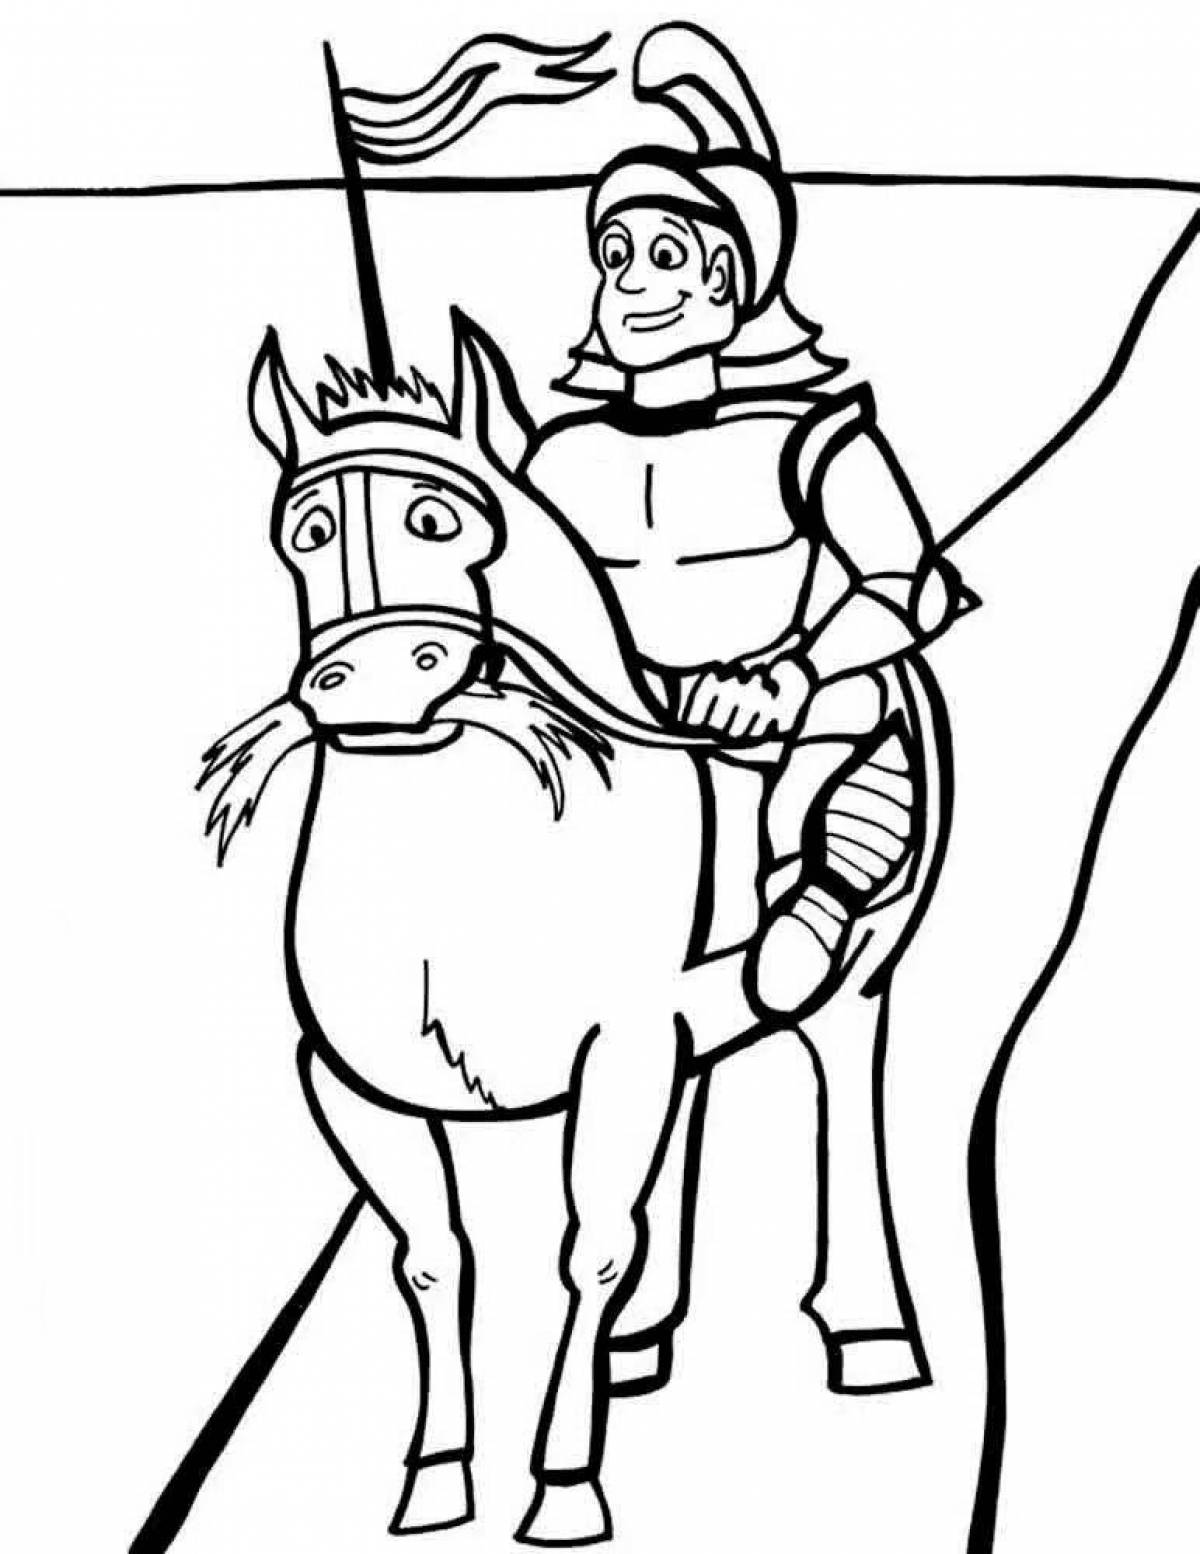 Courageous knight coloring book for kids